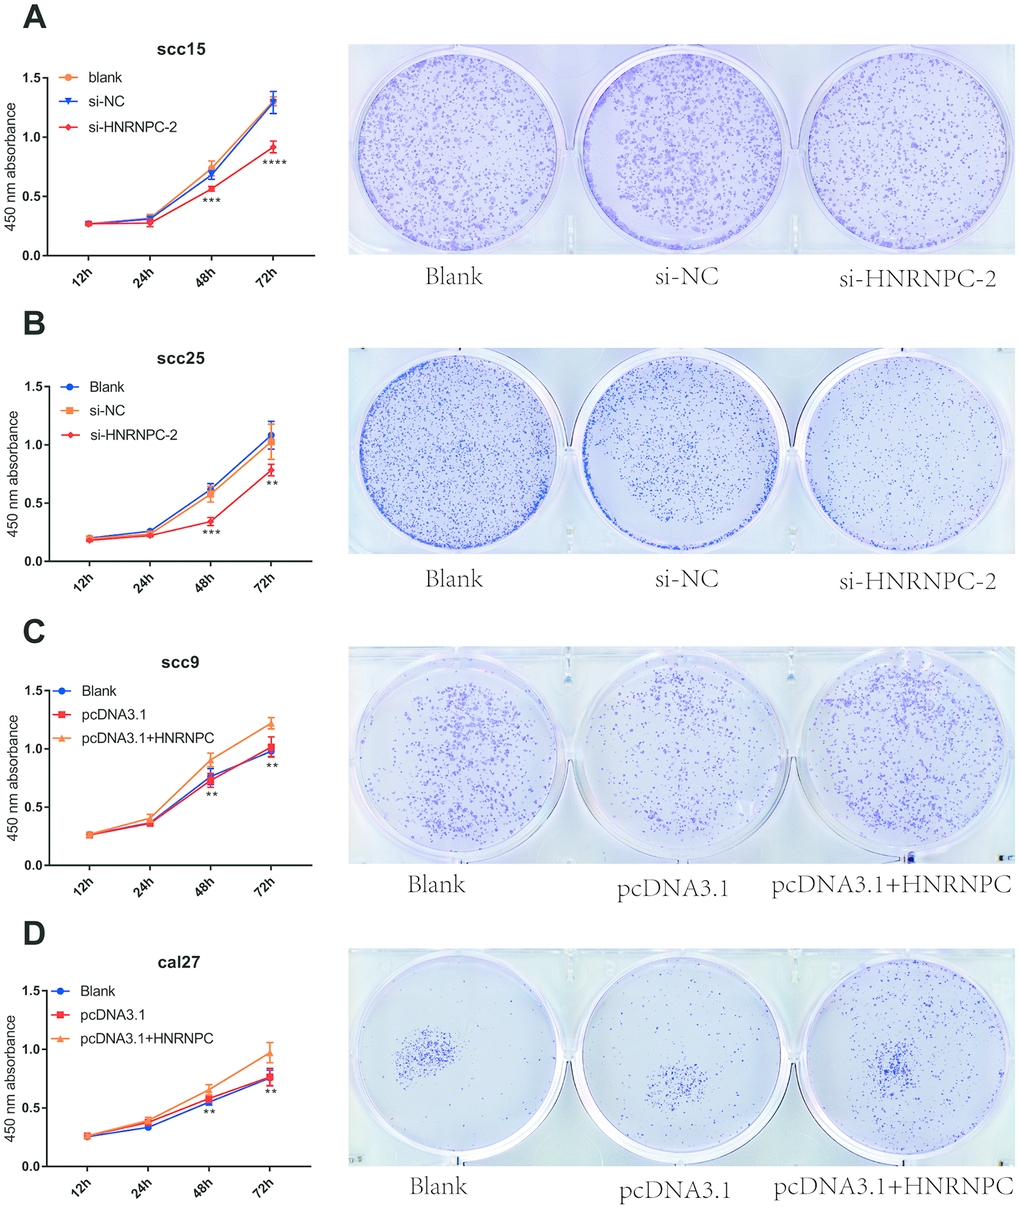 HNRNPC promoted proliferation in OSCC cell lines. (A) Si-HNRNPC inhibit cell proliferation in scc15 cell line (48h p=0.0002, 72h pB) Si-HNRNPC inhibit cell proliferation in scc25 cell line (48h p=0.0001, 72h p=0.0073). (C) Overexpression of HNRNPC promoted proliferation in scc9 cell line (48h p=0.0021, 72h p=0.0035). (D) Overexpression of HNRNPC promoted proliferation in cal27 cell line (48h p= 0.0018, 72h p= 0.0022).